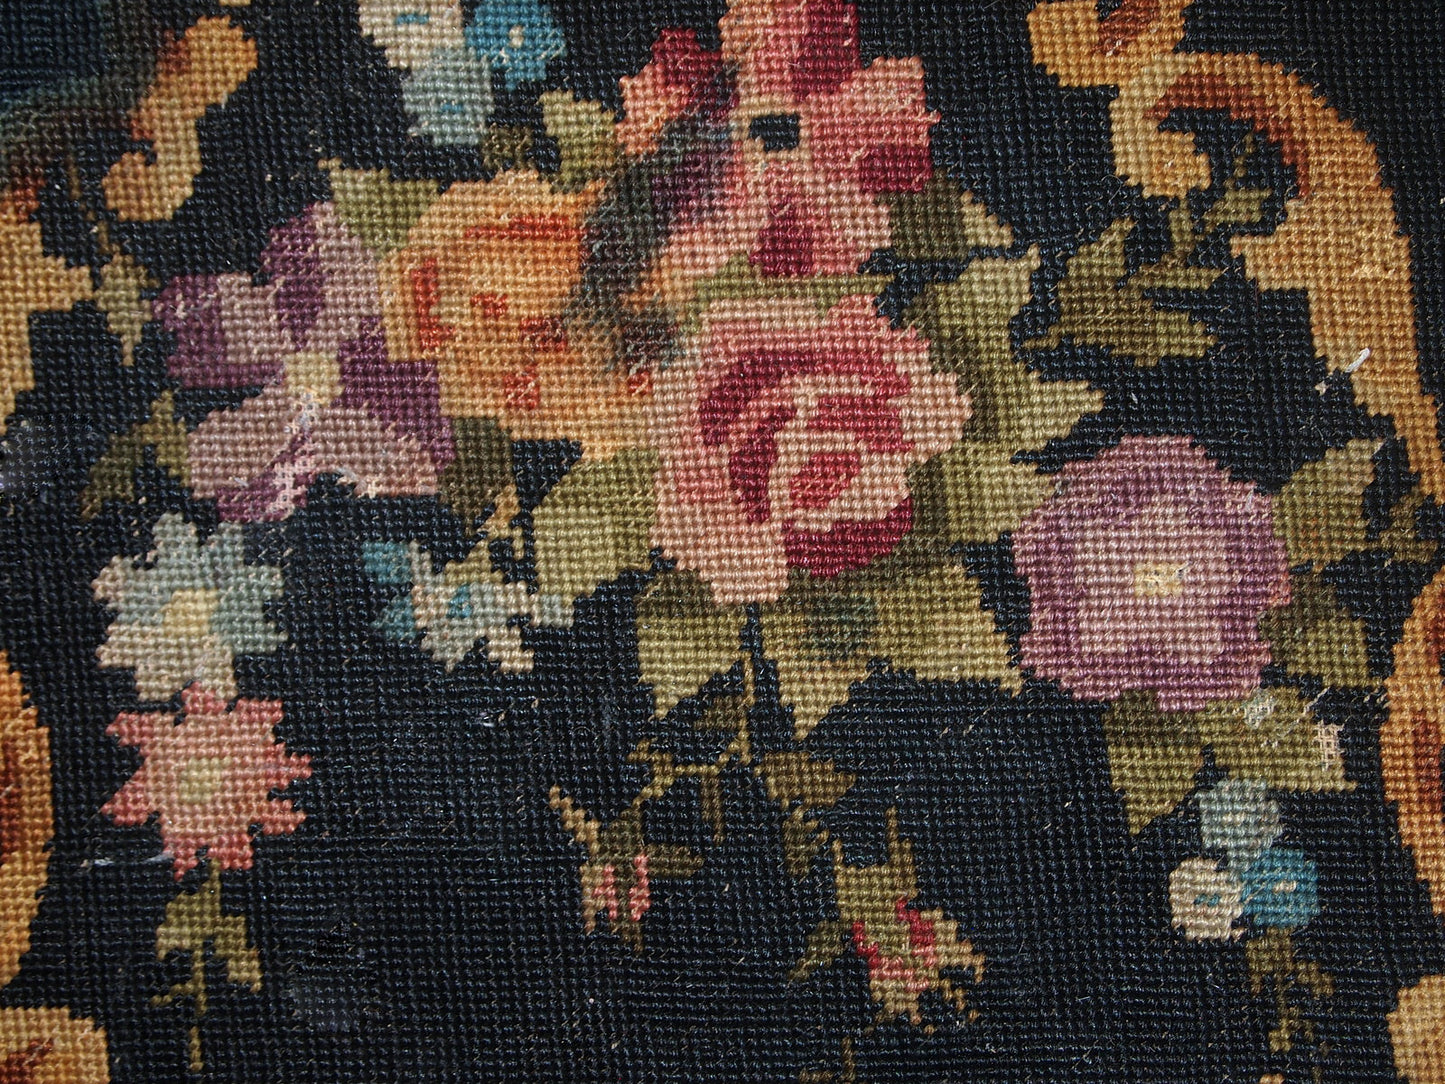 Handmade antique unframed English Needlepoint in black colour with floral design. The size of actual needlepoint is 1.3' x 1.4' (42cm x 45cm) and with the sides is 2' x 2.2' (63cm x 68cm). It is in original condition, it has some discolourations on the side areas. It can be framed or attached to a decorative pillow, chair etc.